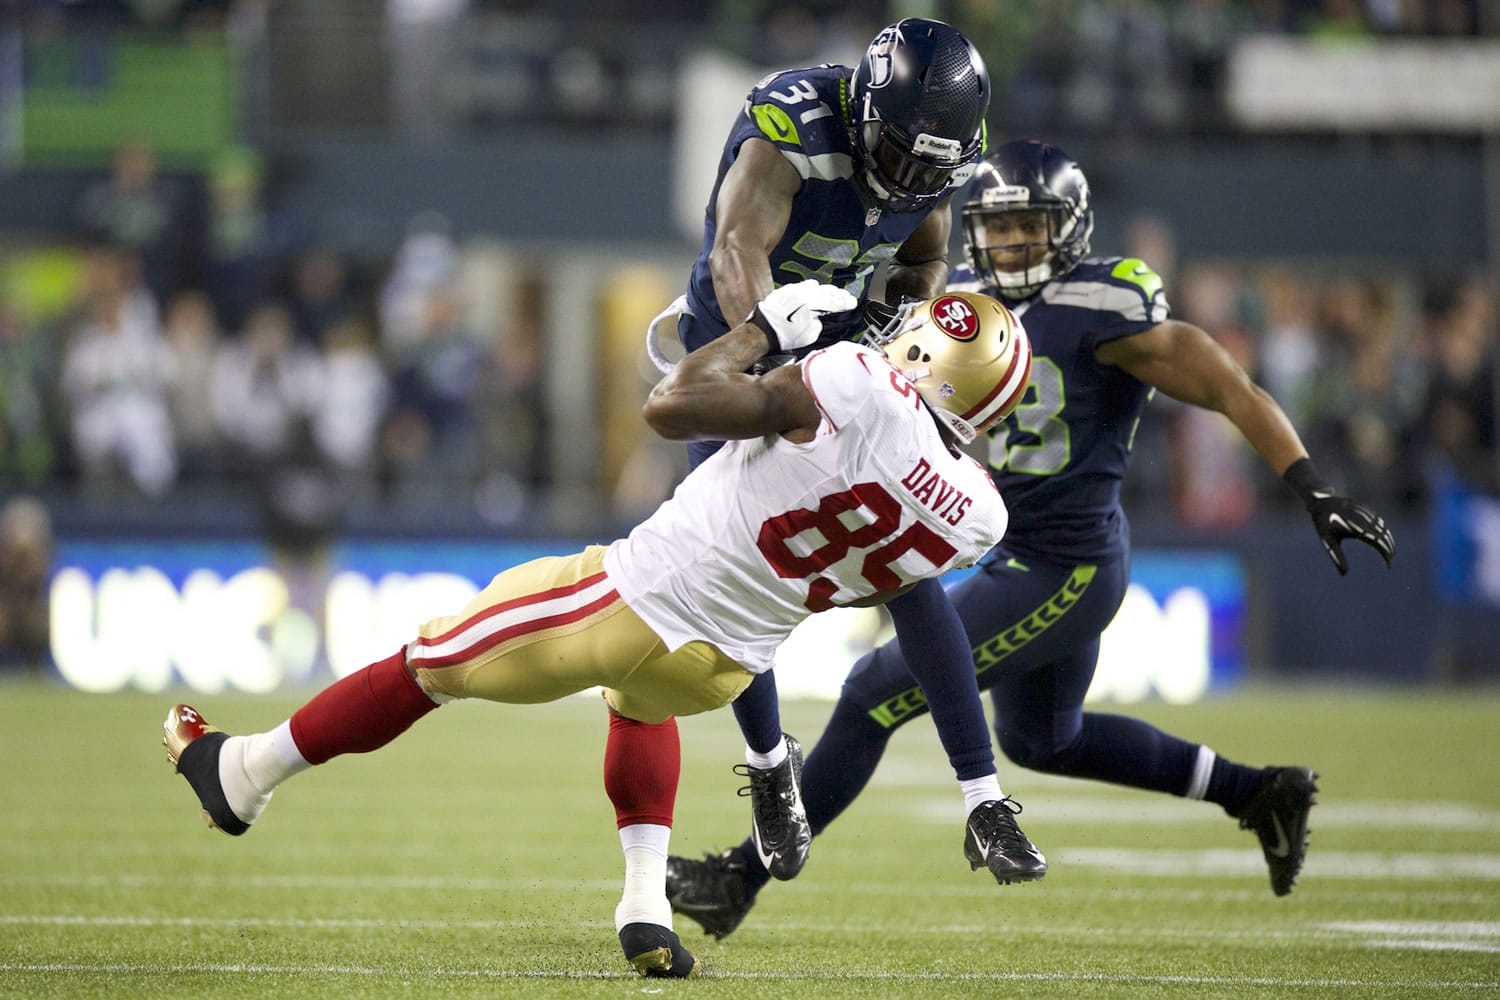 Kam Chancellor (31) of the Seattle Seahawks makes a hard hit on Vernon Davis of the San Francisco 49ers in the NFC Championship game at CenturyLink Field on Jan.